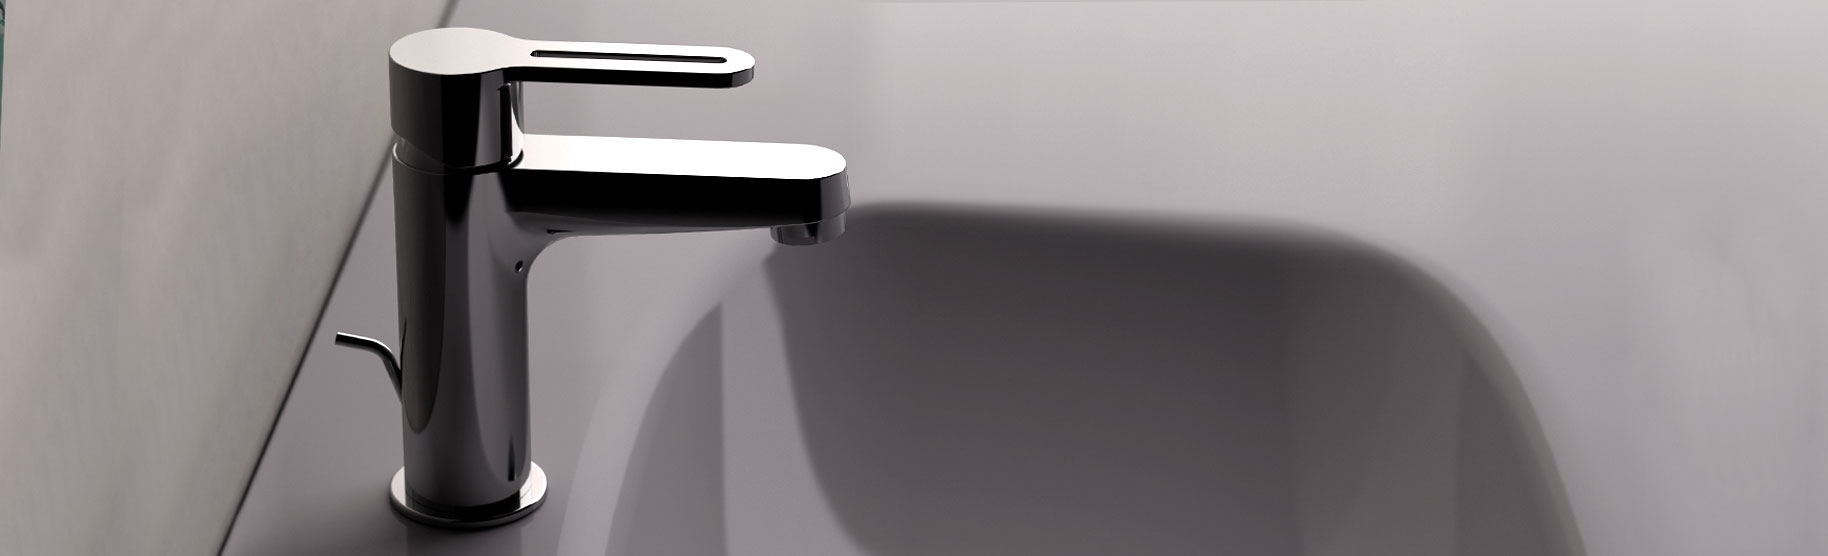 smart faucets collection young and cheap